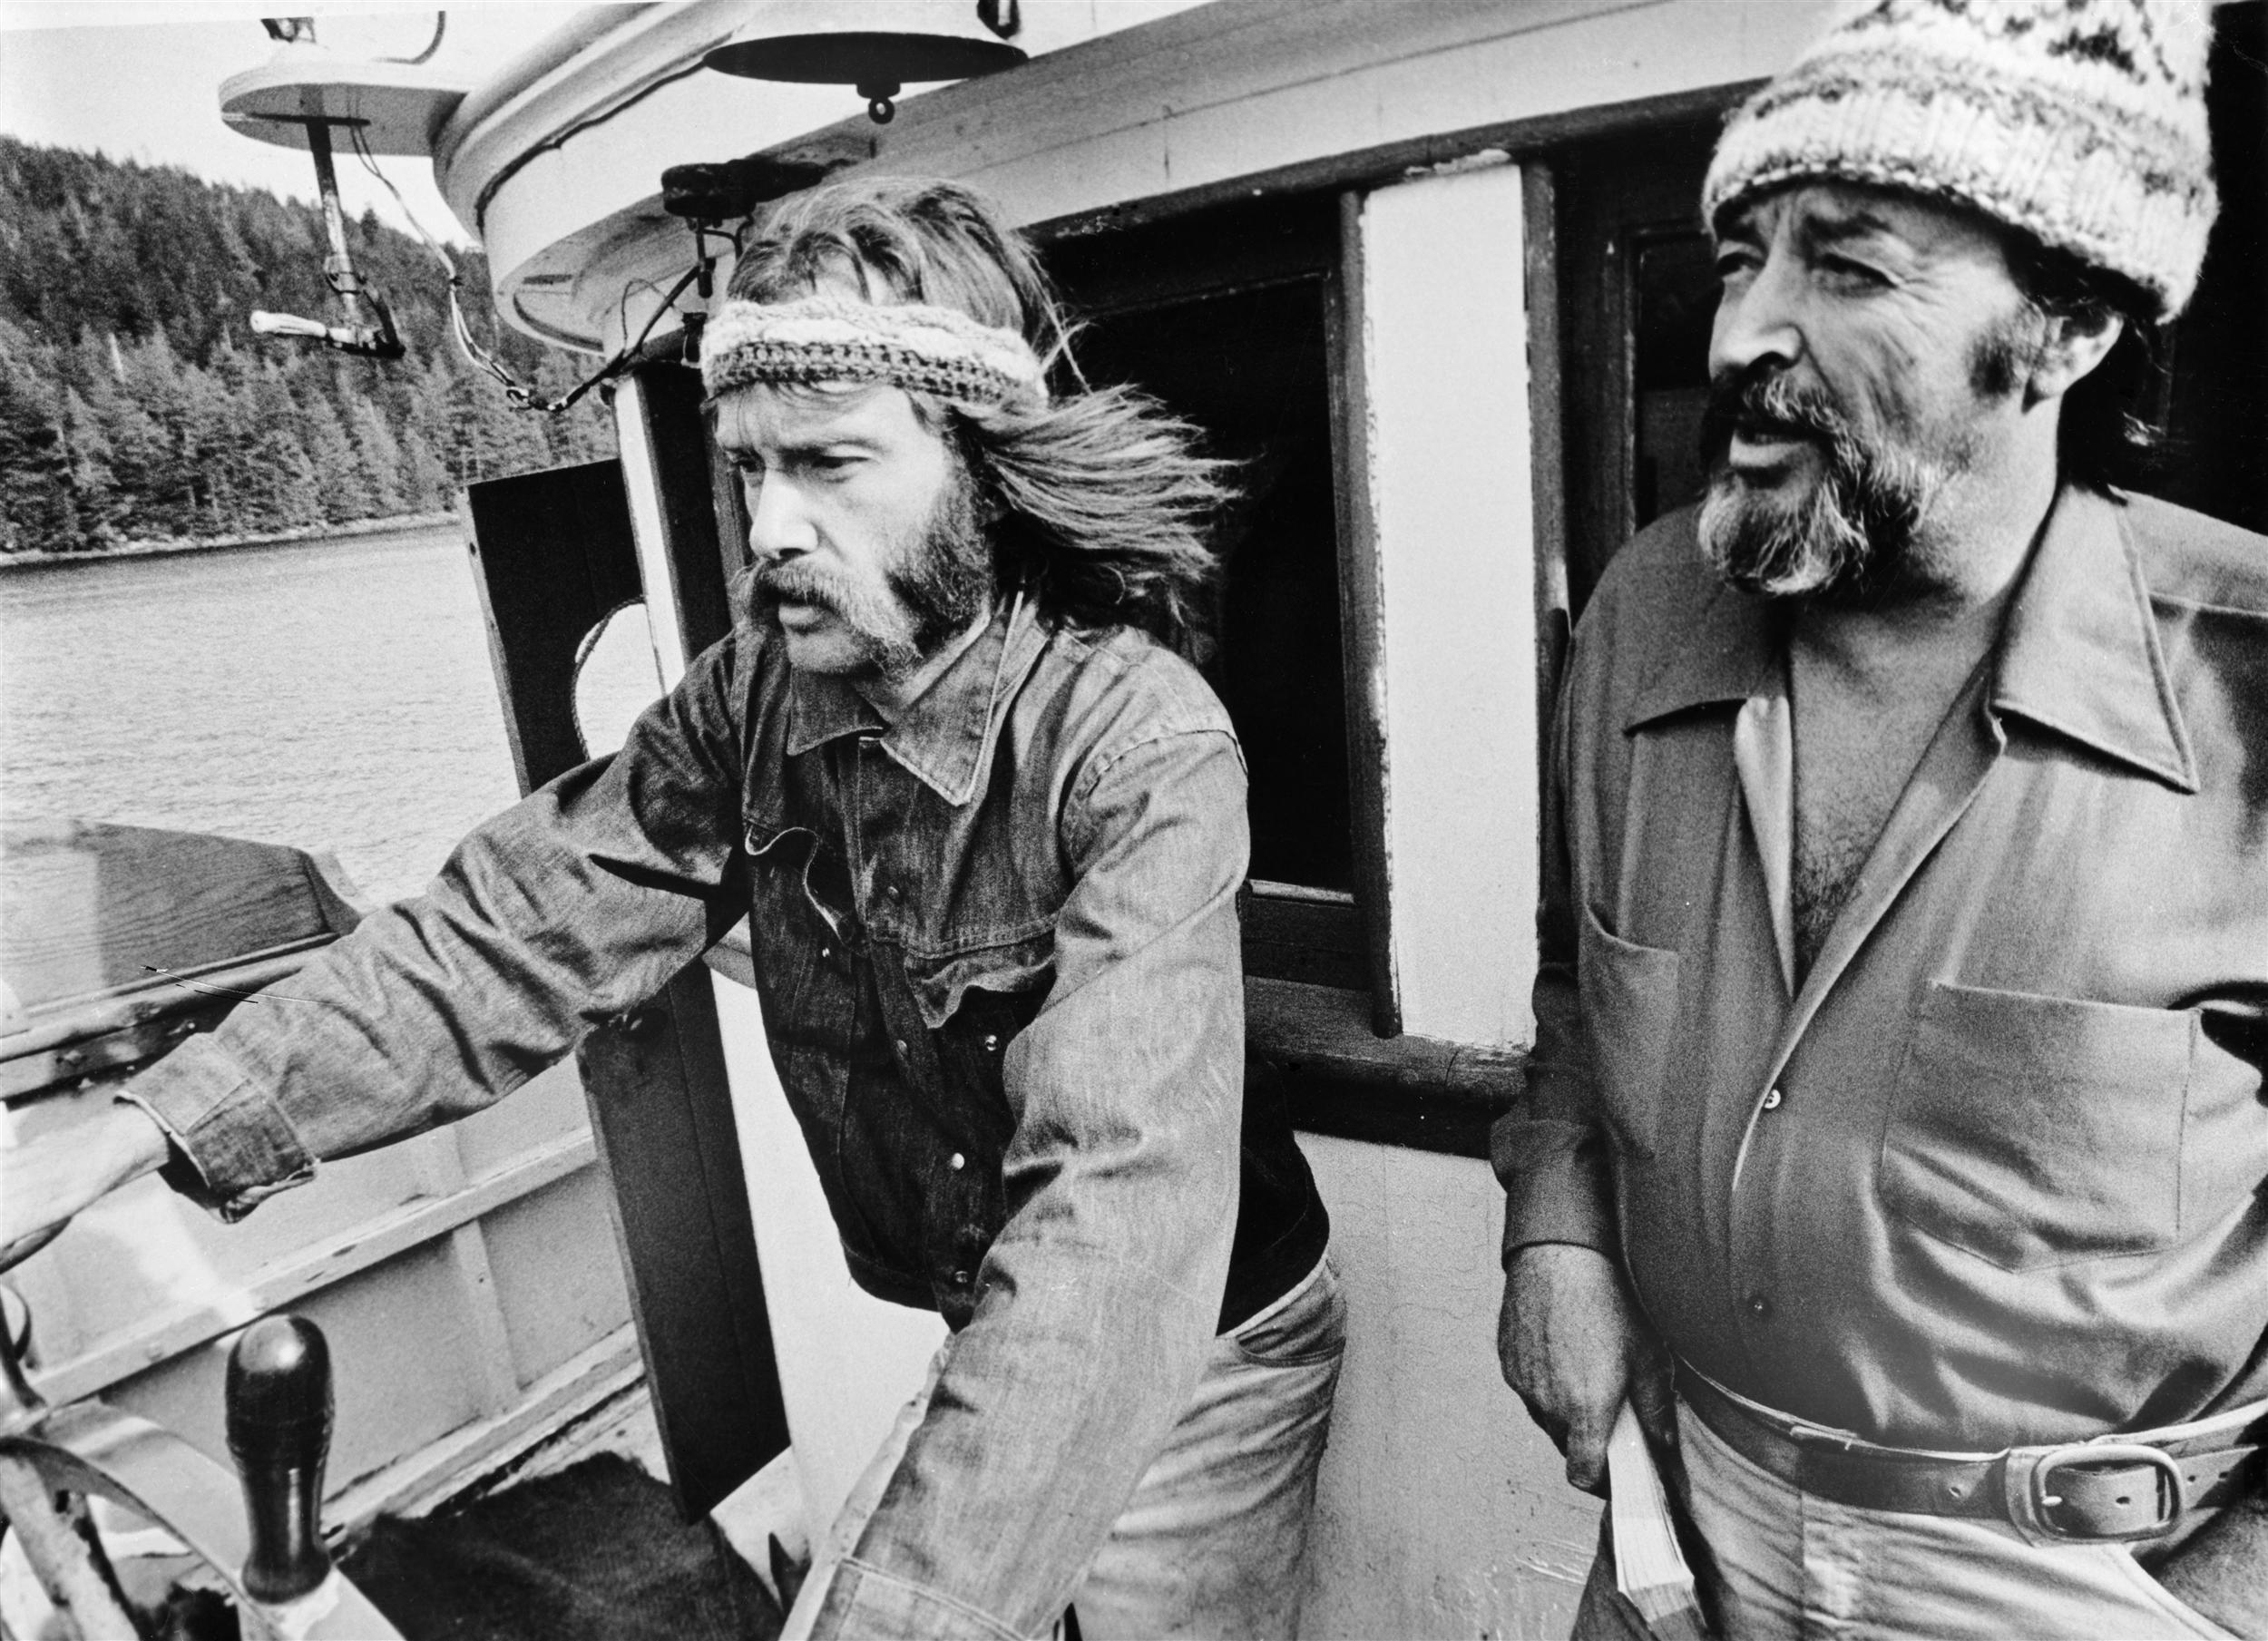 Bob Hunter on left at the helm of the Phyllis Cormack together with Ben Metcalfe. En route to Amchitka. (Greenpeace Witness book page 94) (The Greenpeace story book page 12 similar).